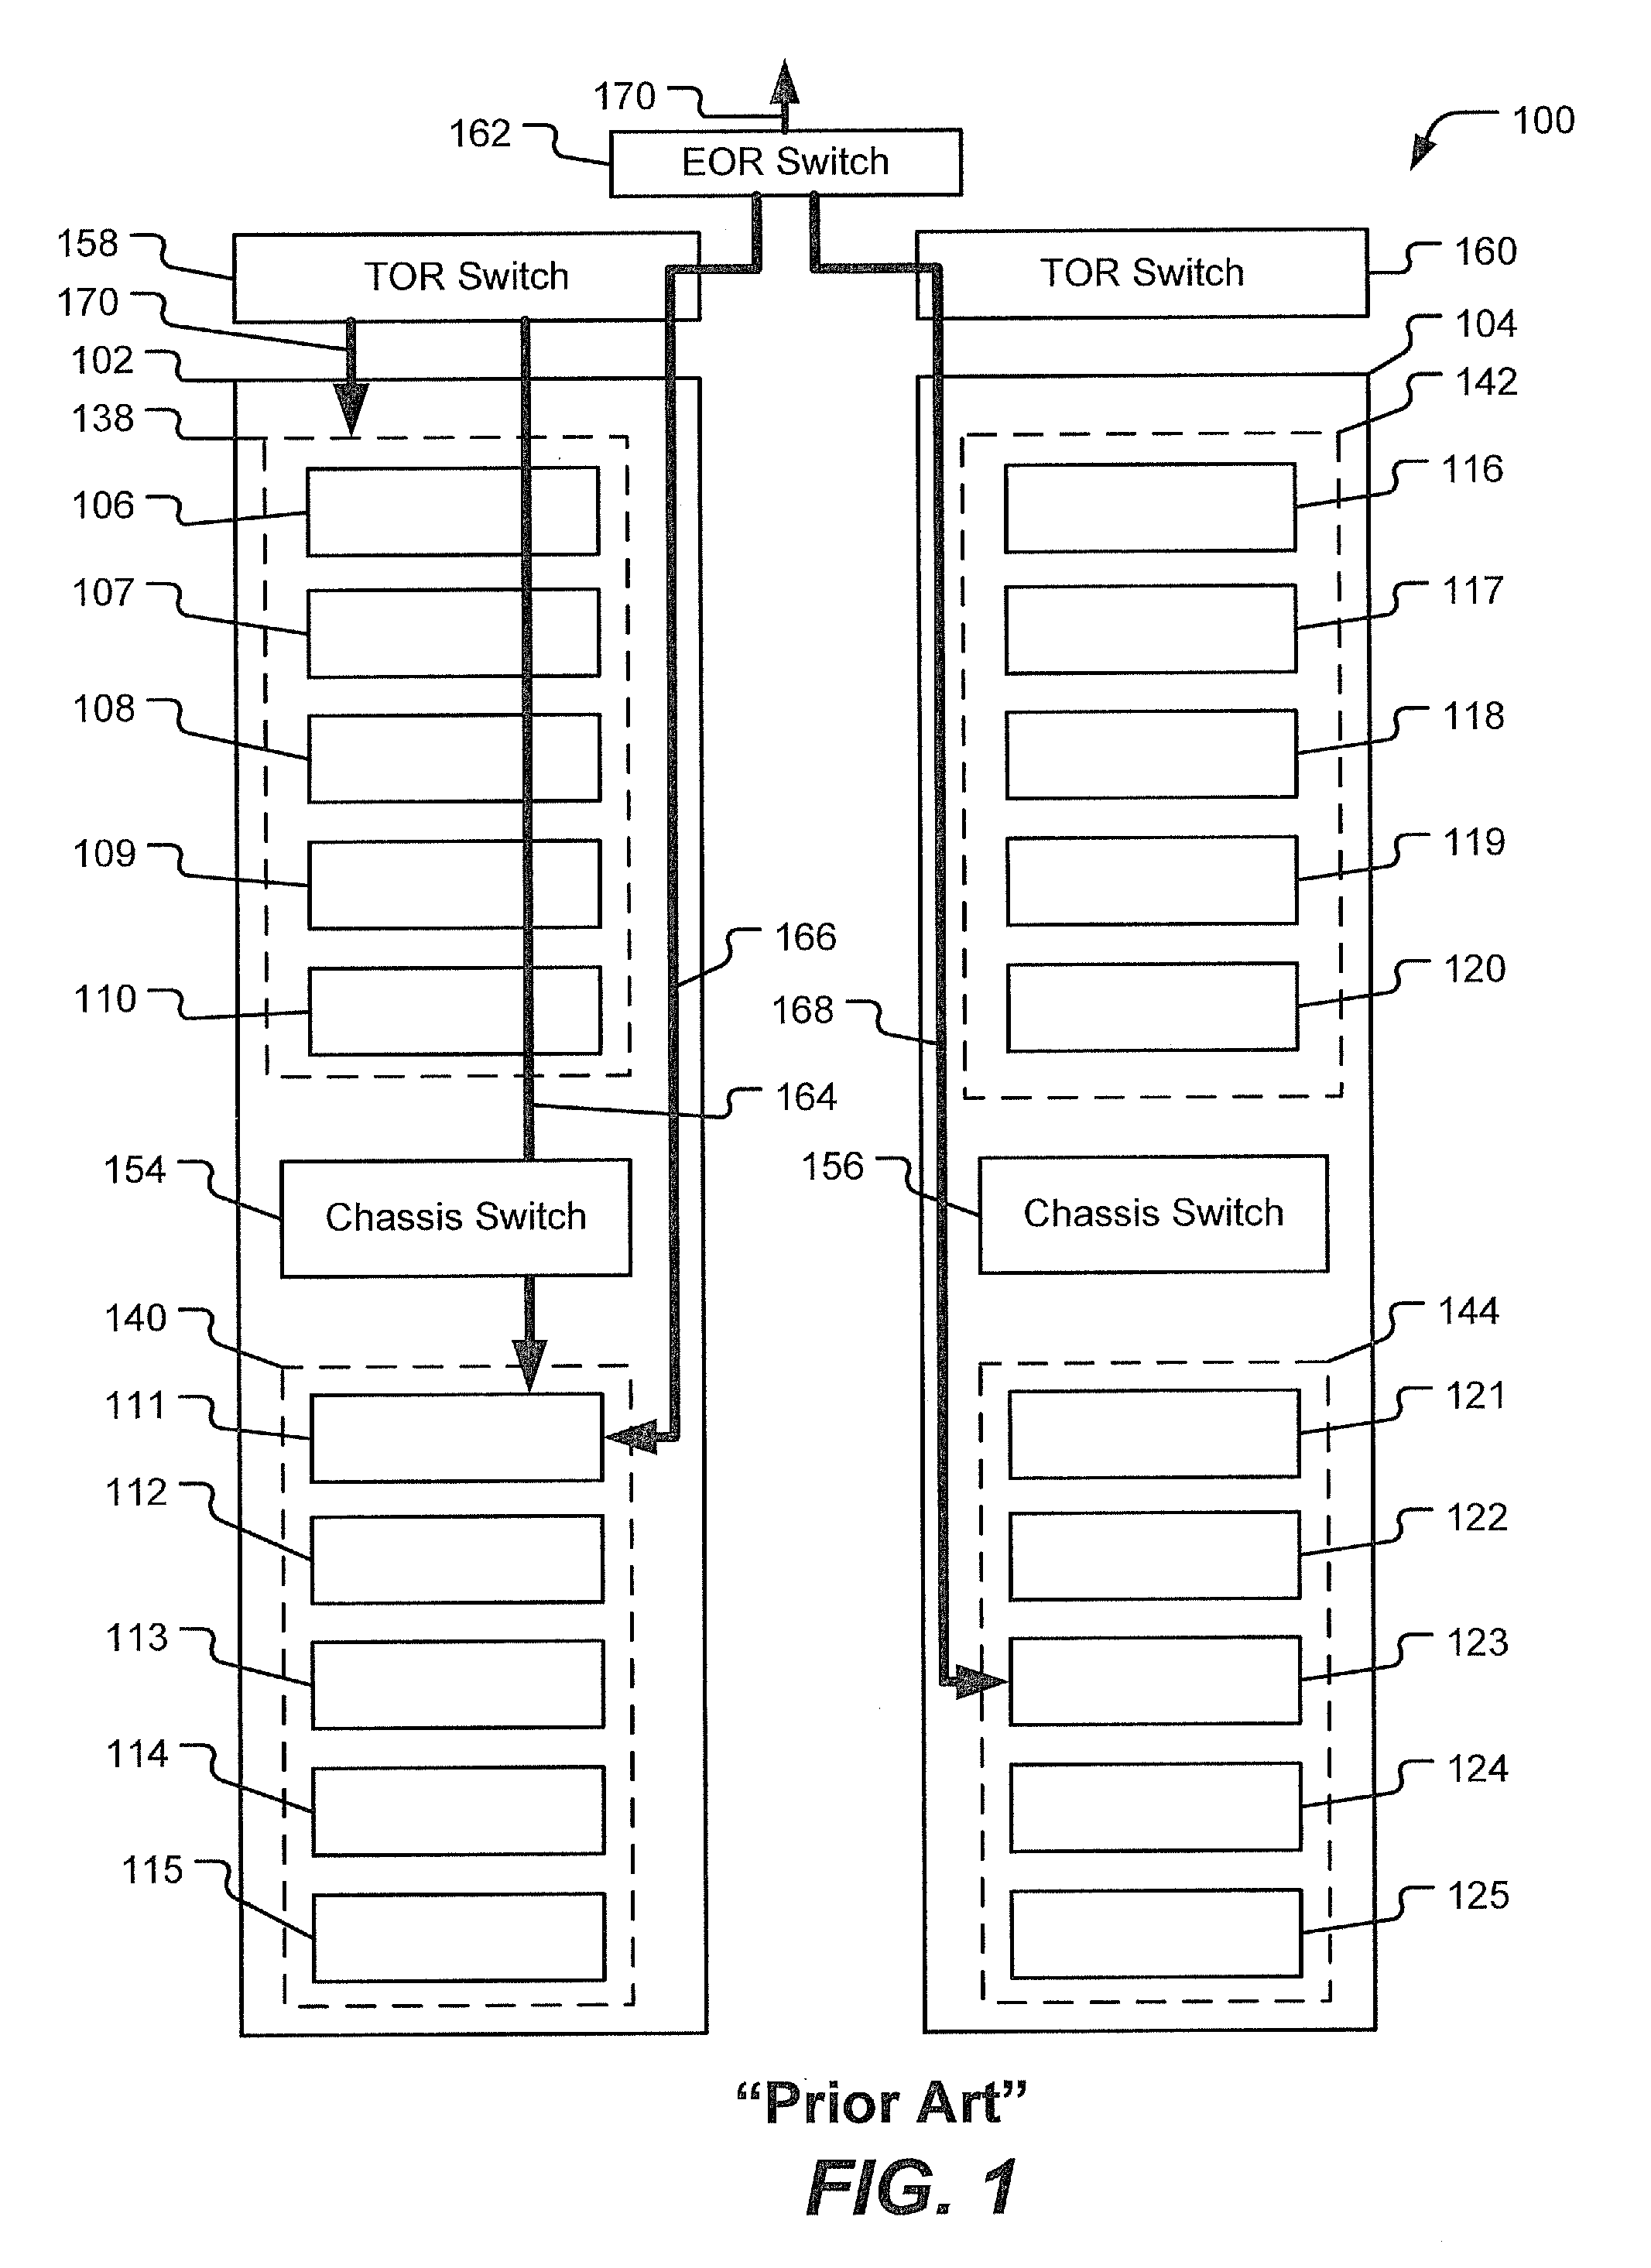 Multicasting using a multitiered distributed virtual bridge hierarchy